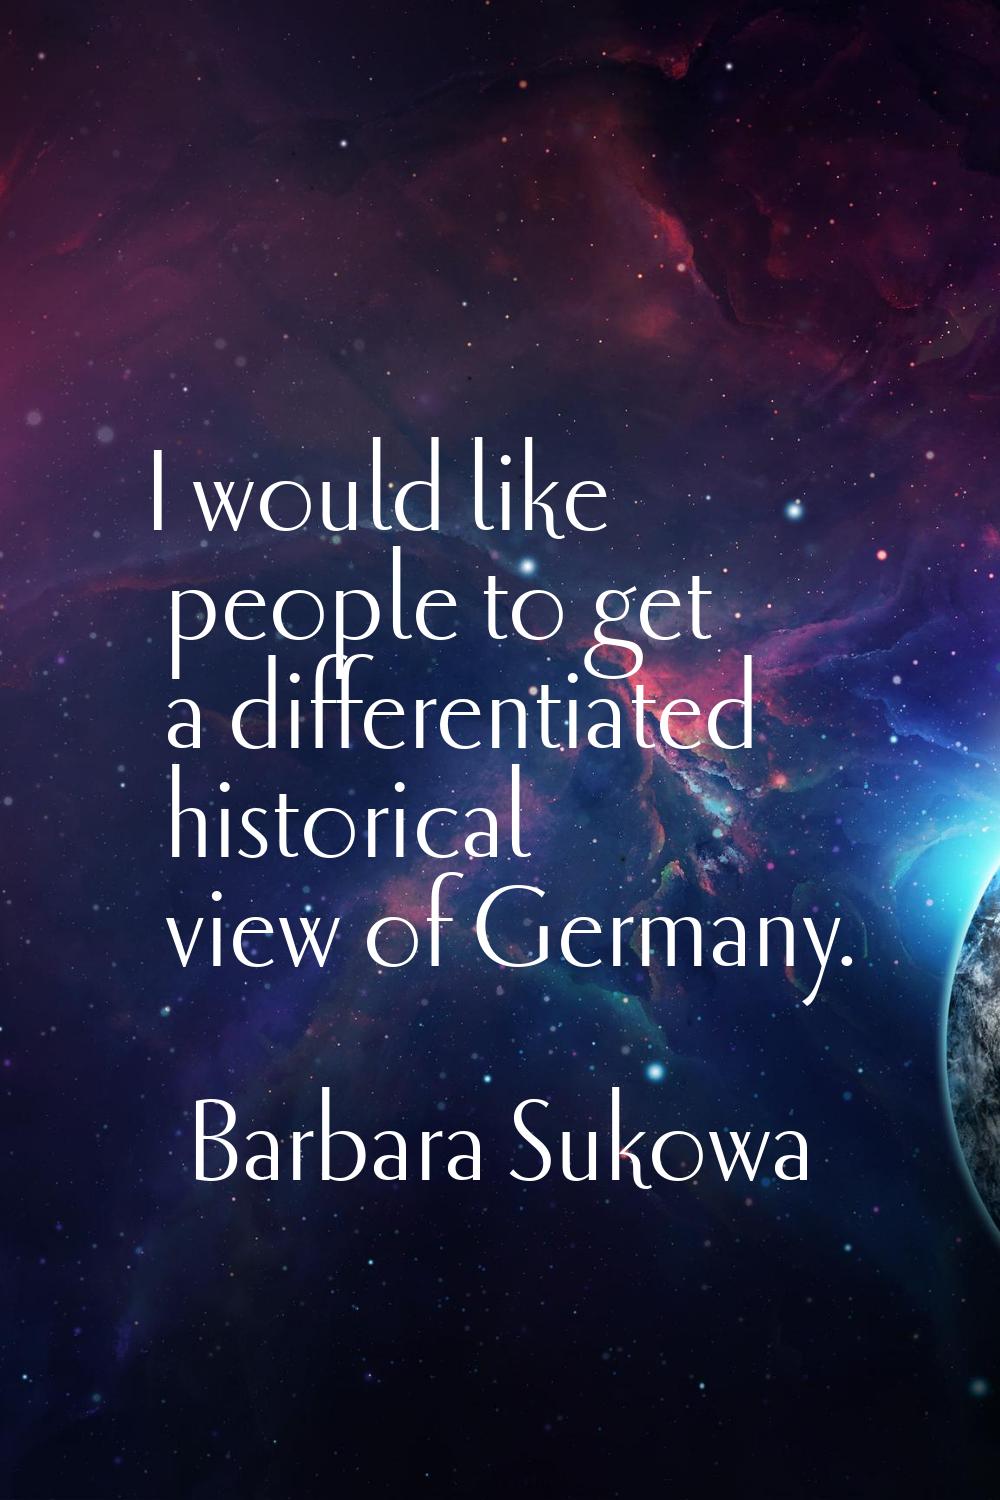 I would like people to get a differentiated historical view of Germany.